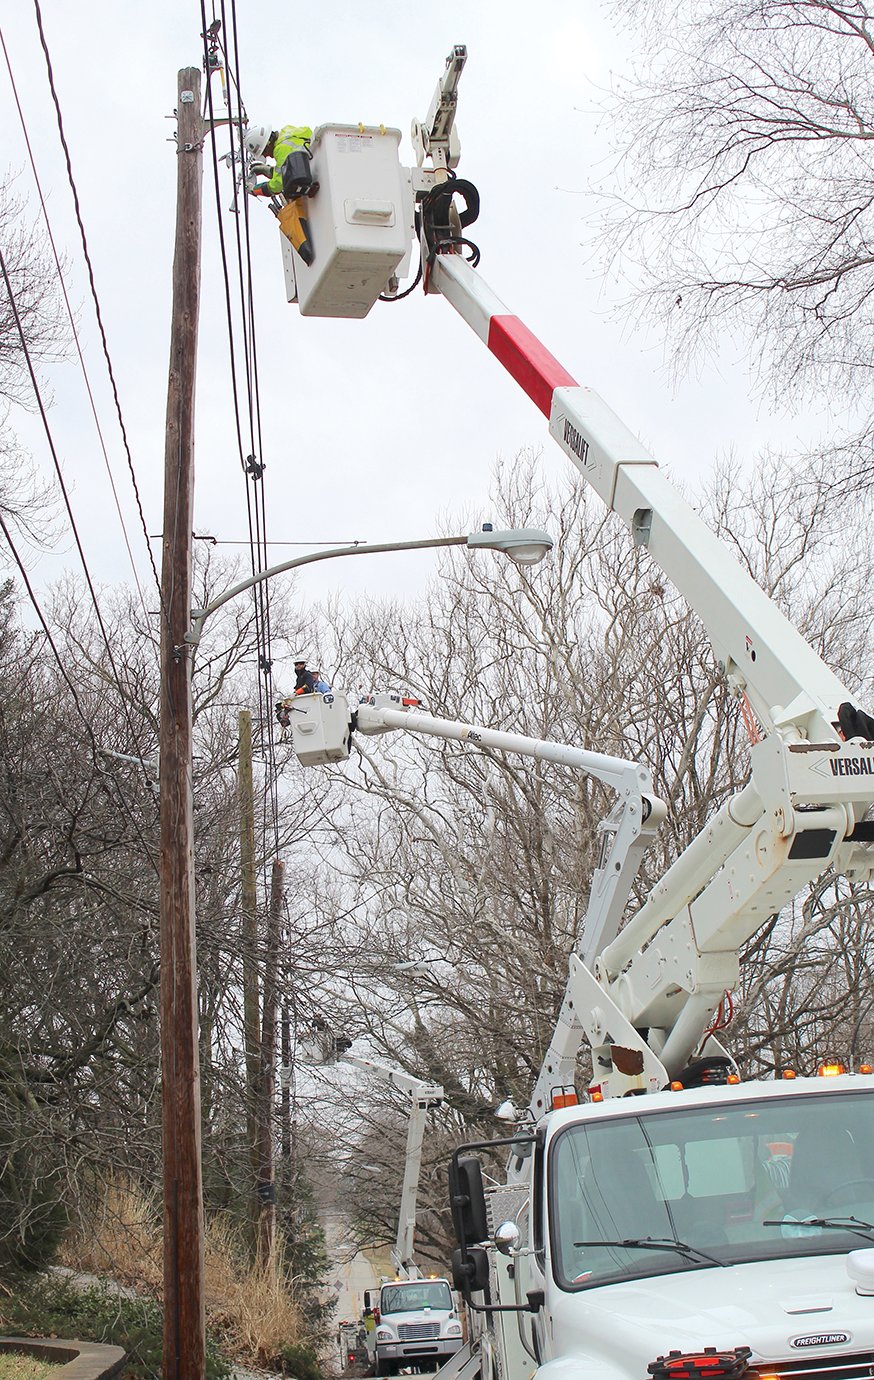 Work performed at the intersection of Wabash Avenue and Vine Street to restore power to an estimated 400 residents continued through noon Tuesday.